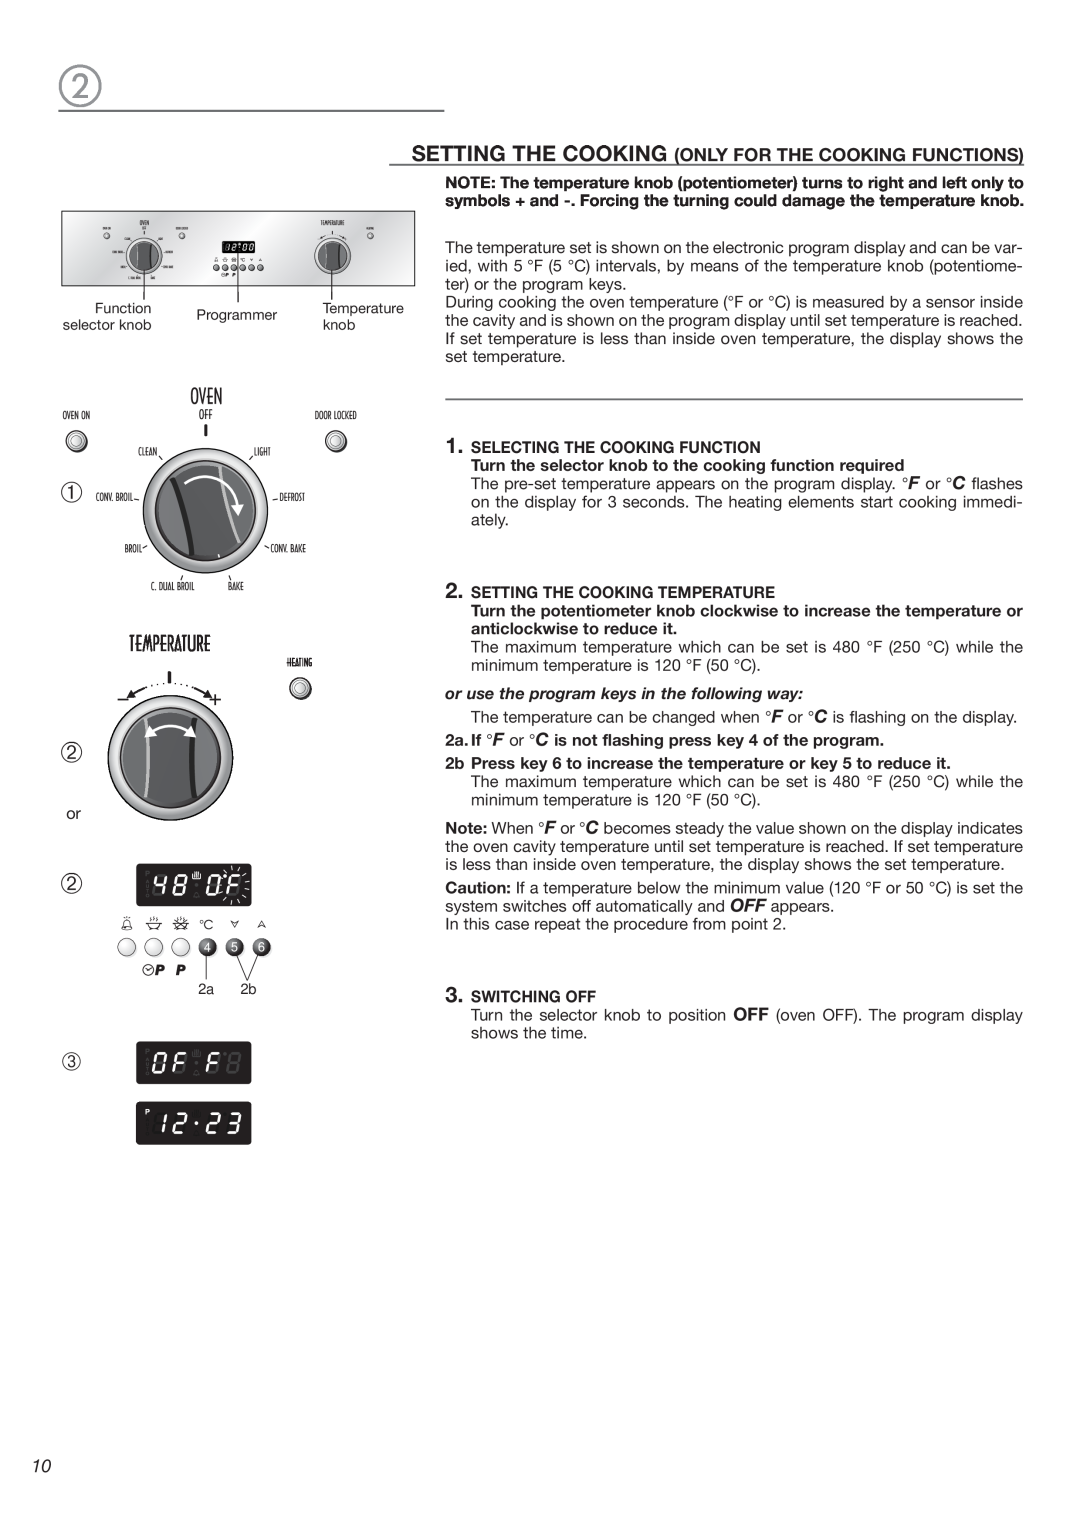 DeLonghi 24 SS Setting The Cooking Only For The Cooking Functions, or use the program keys in the following way, knob 